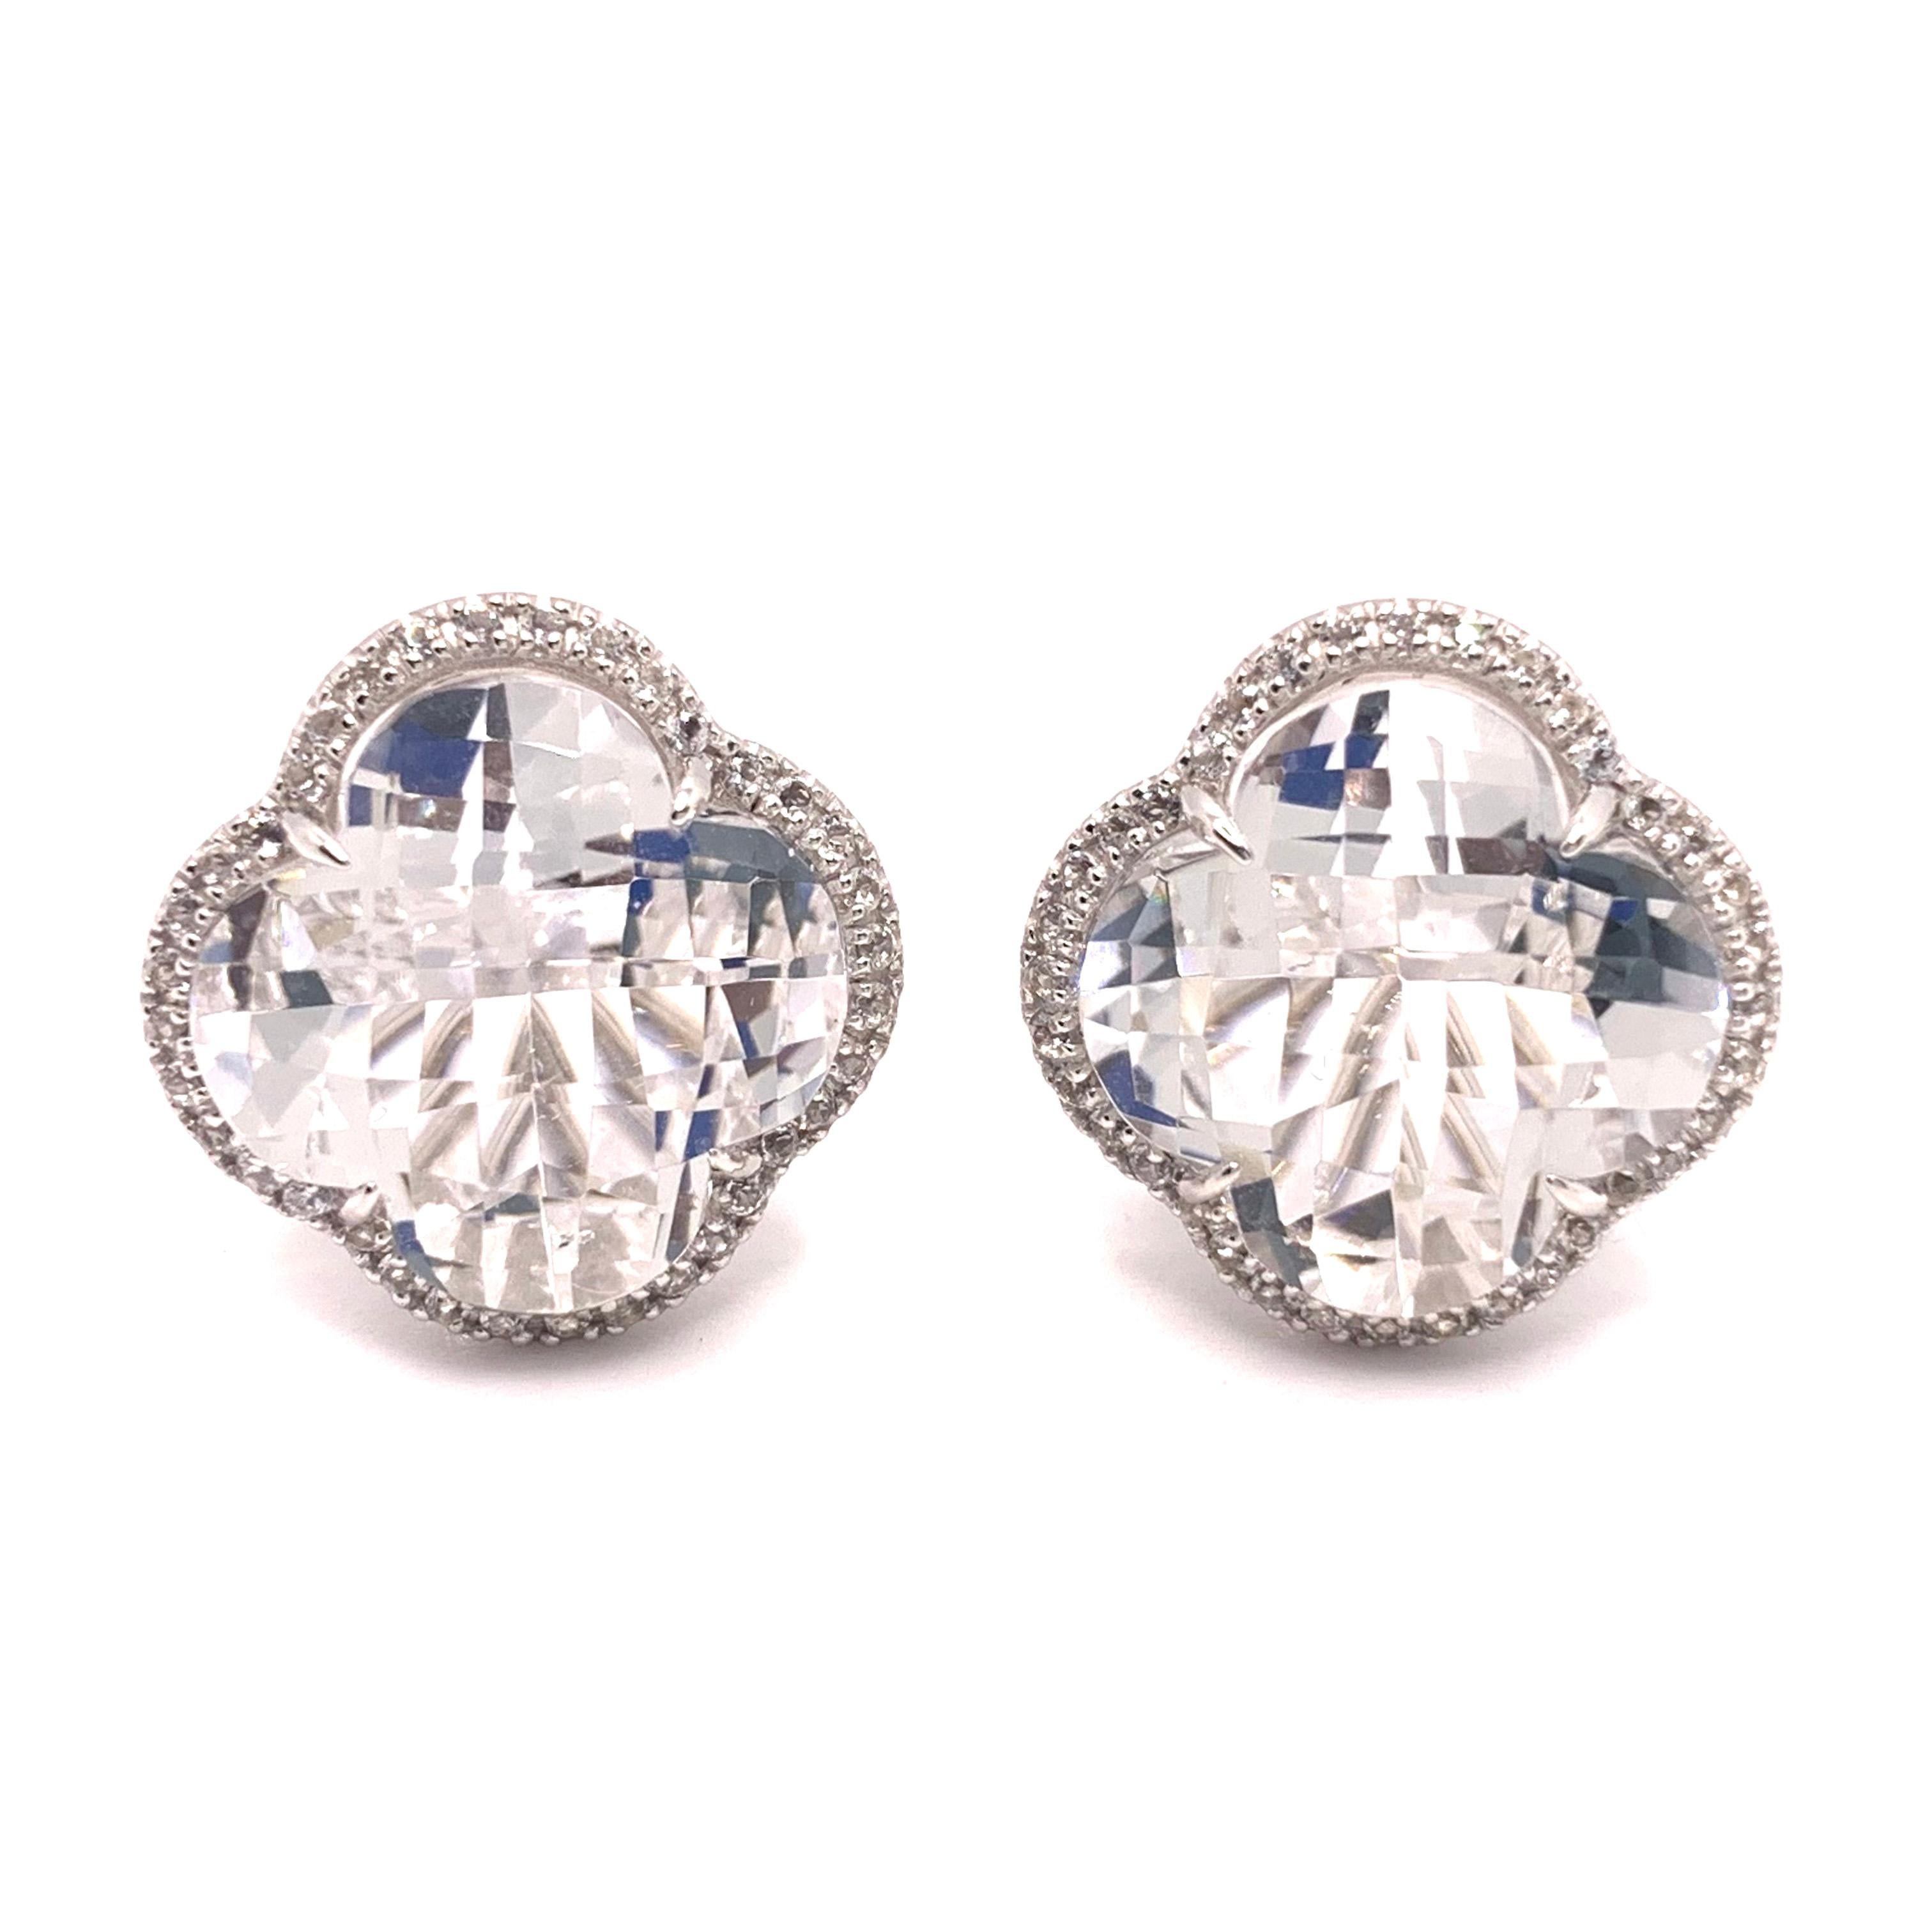 Elegant Clover Shape Clear Quartz Button Earrings

These stunning pair of button earrings feature a pair of clover shape checkerboard-cut clear quartz (aka rock crystal), surrounded with round white topaz, handset in platinum rhodium plated sterling